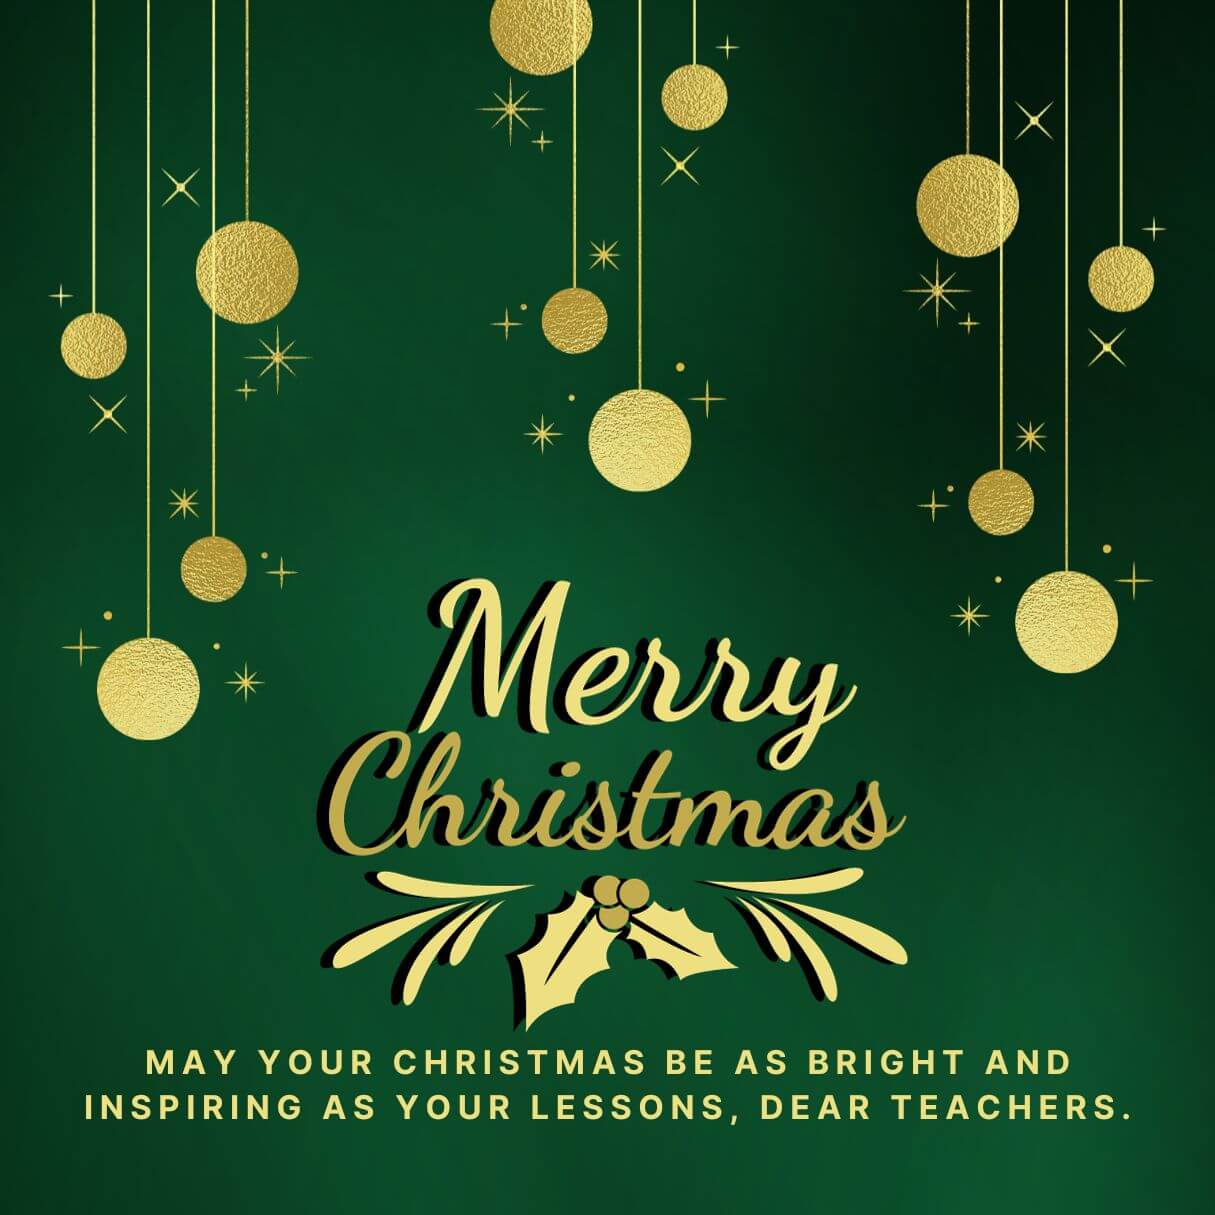 Merry Christmas Wishes Text For Teacher